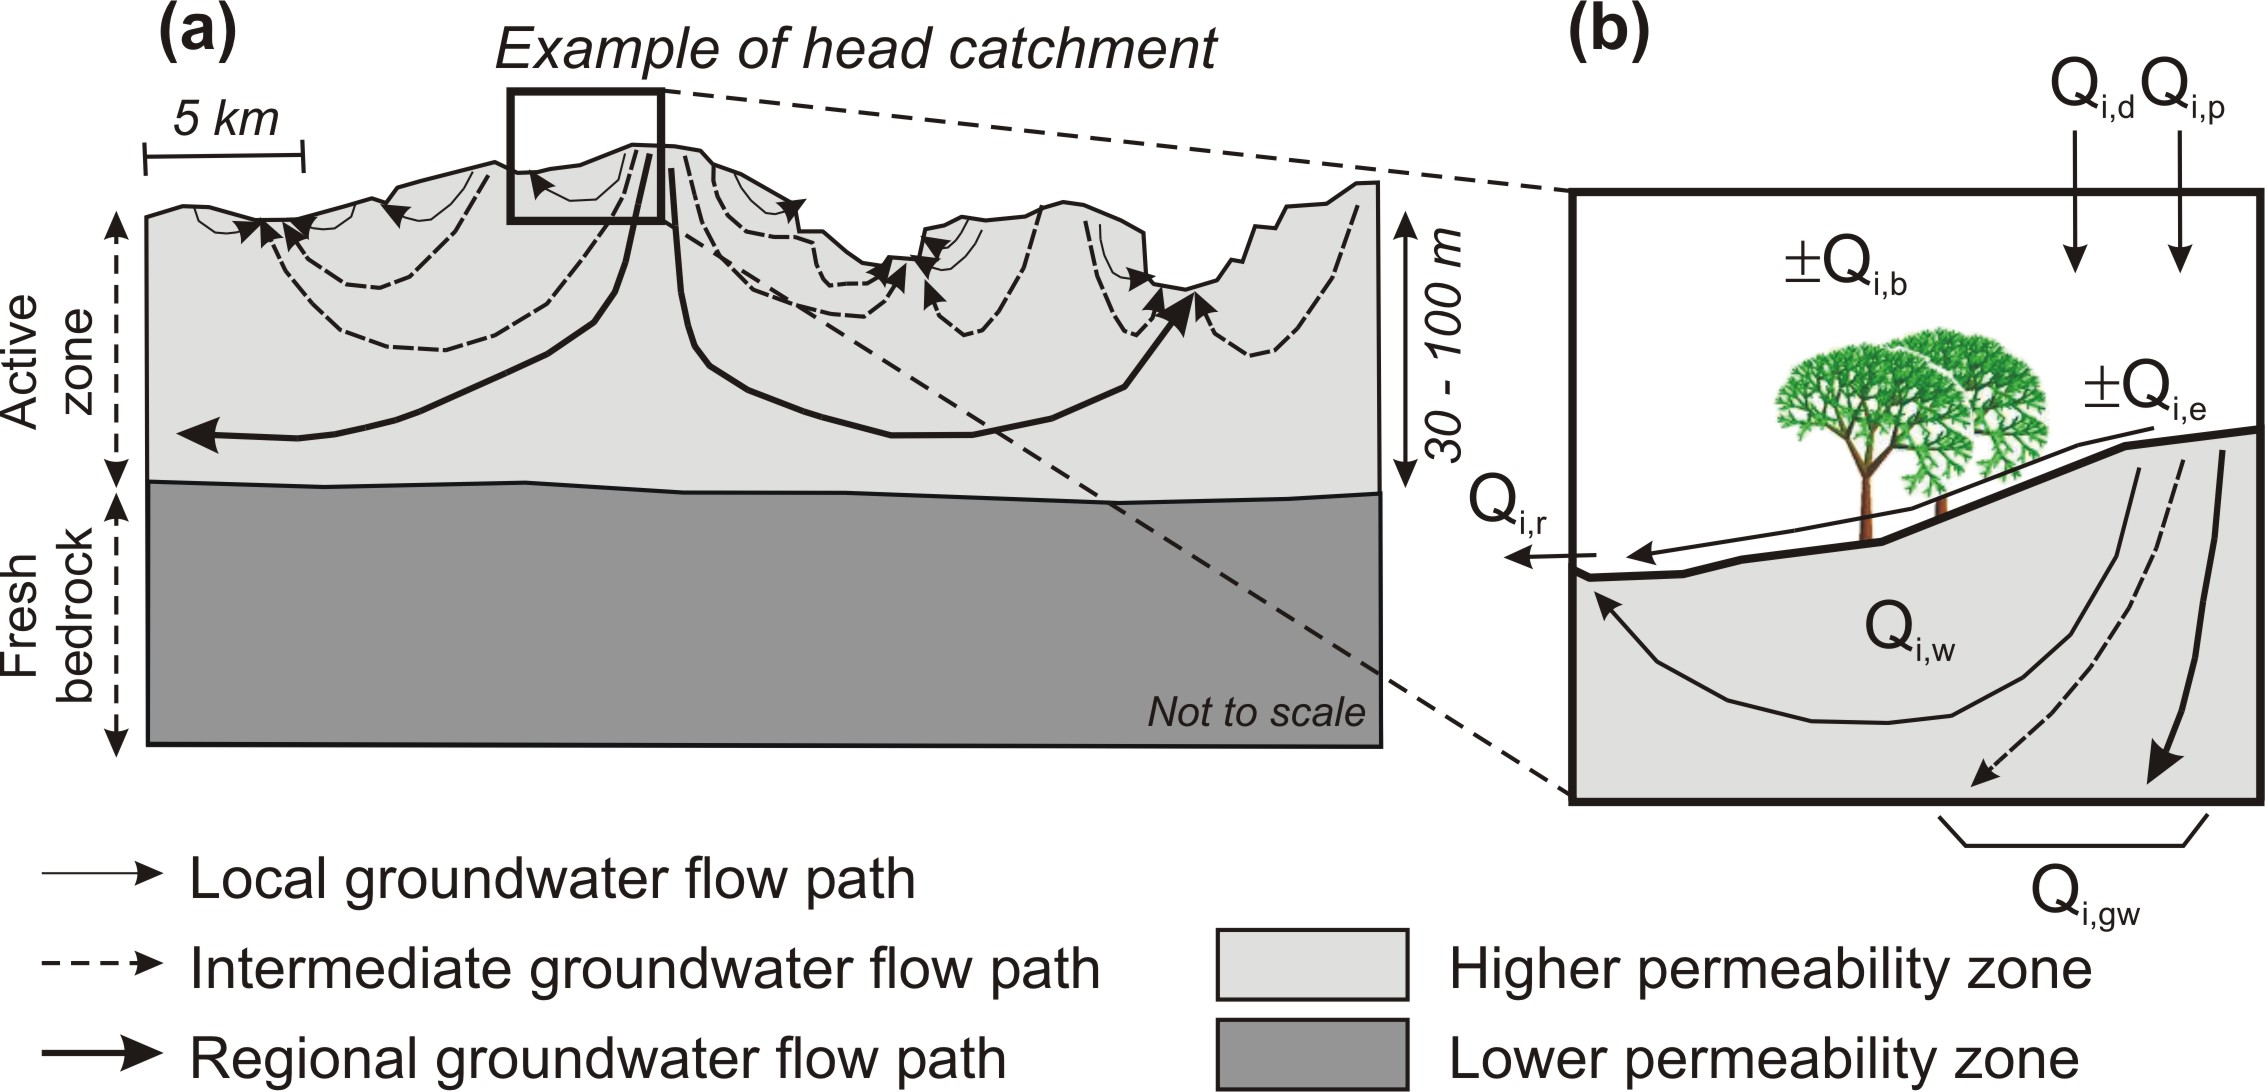 DEEP GROUNDWATER FLOW AS THE MAIN PATHWAY FOR CHEMICAL